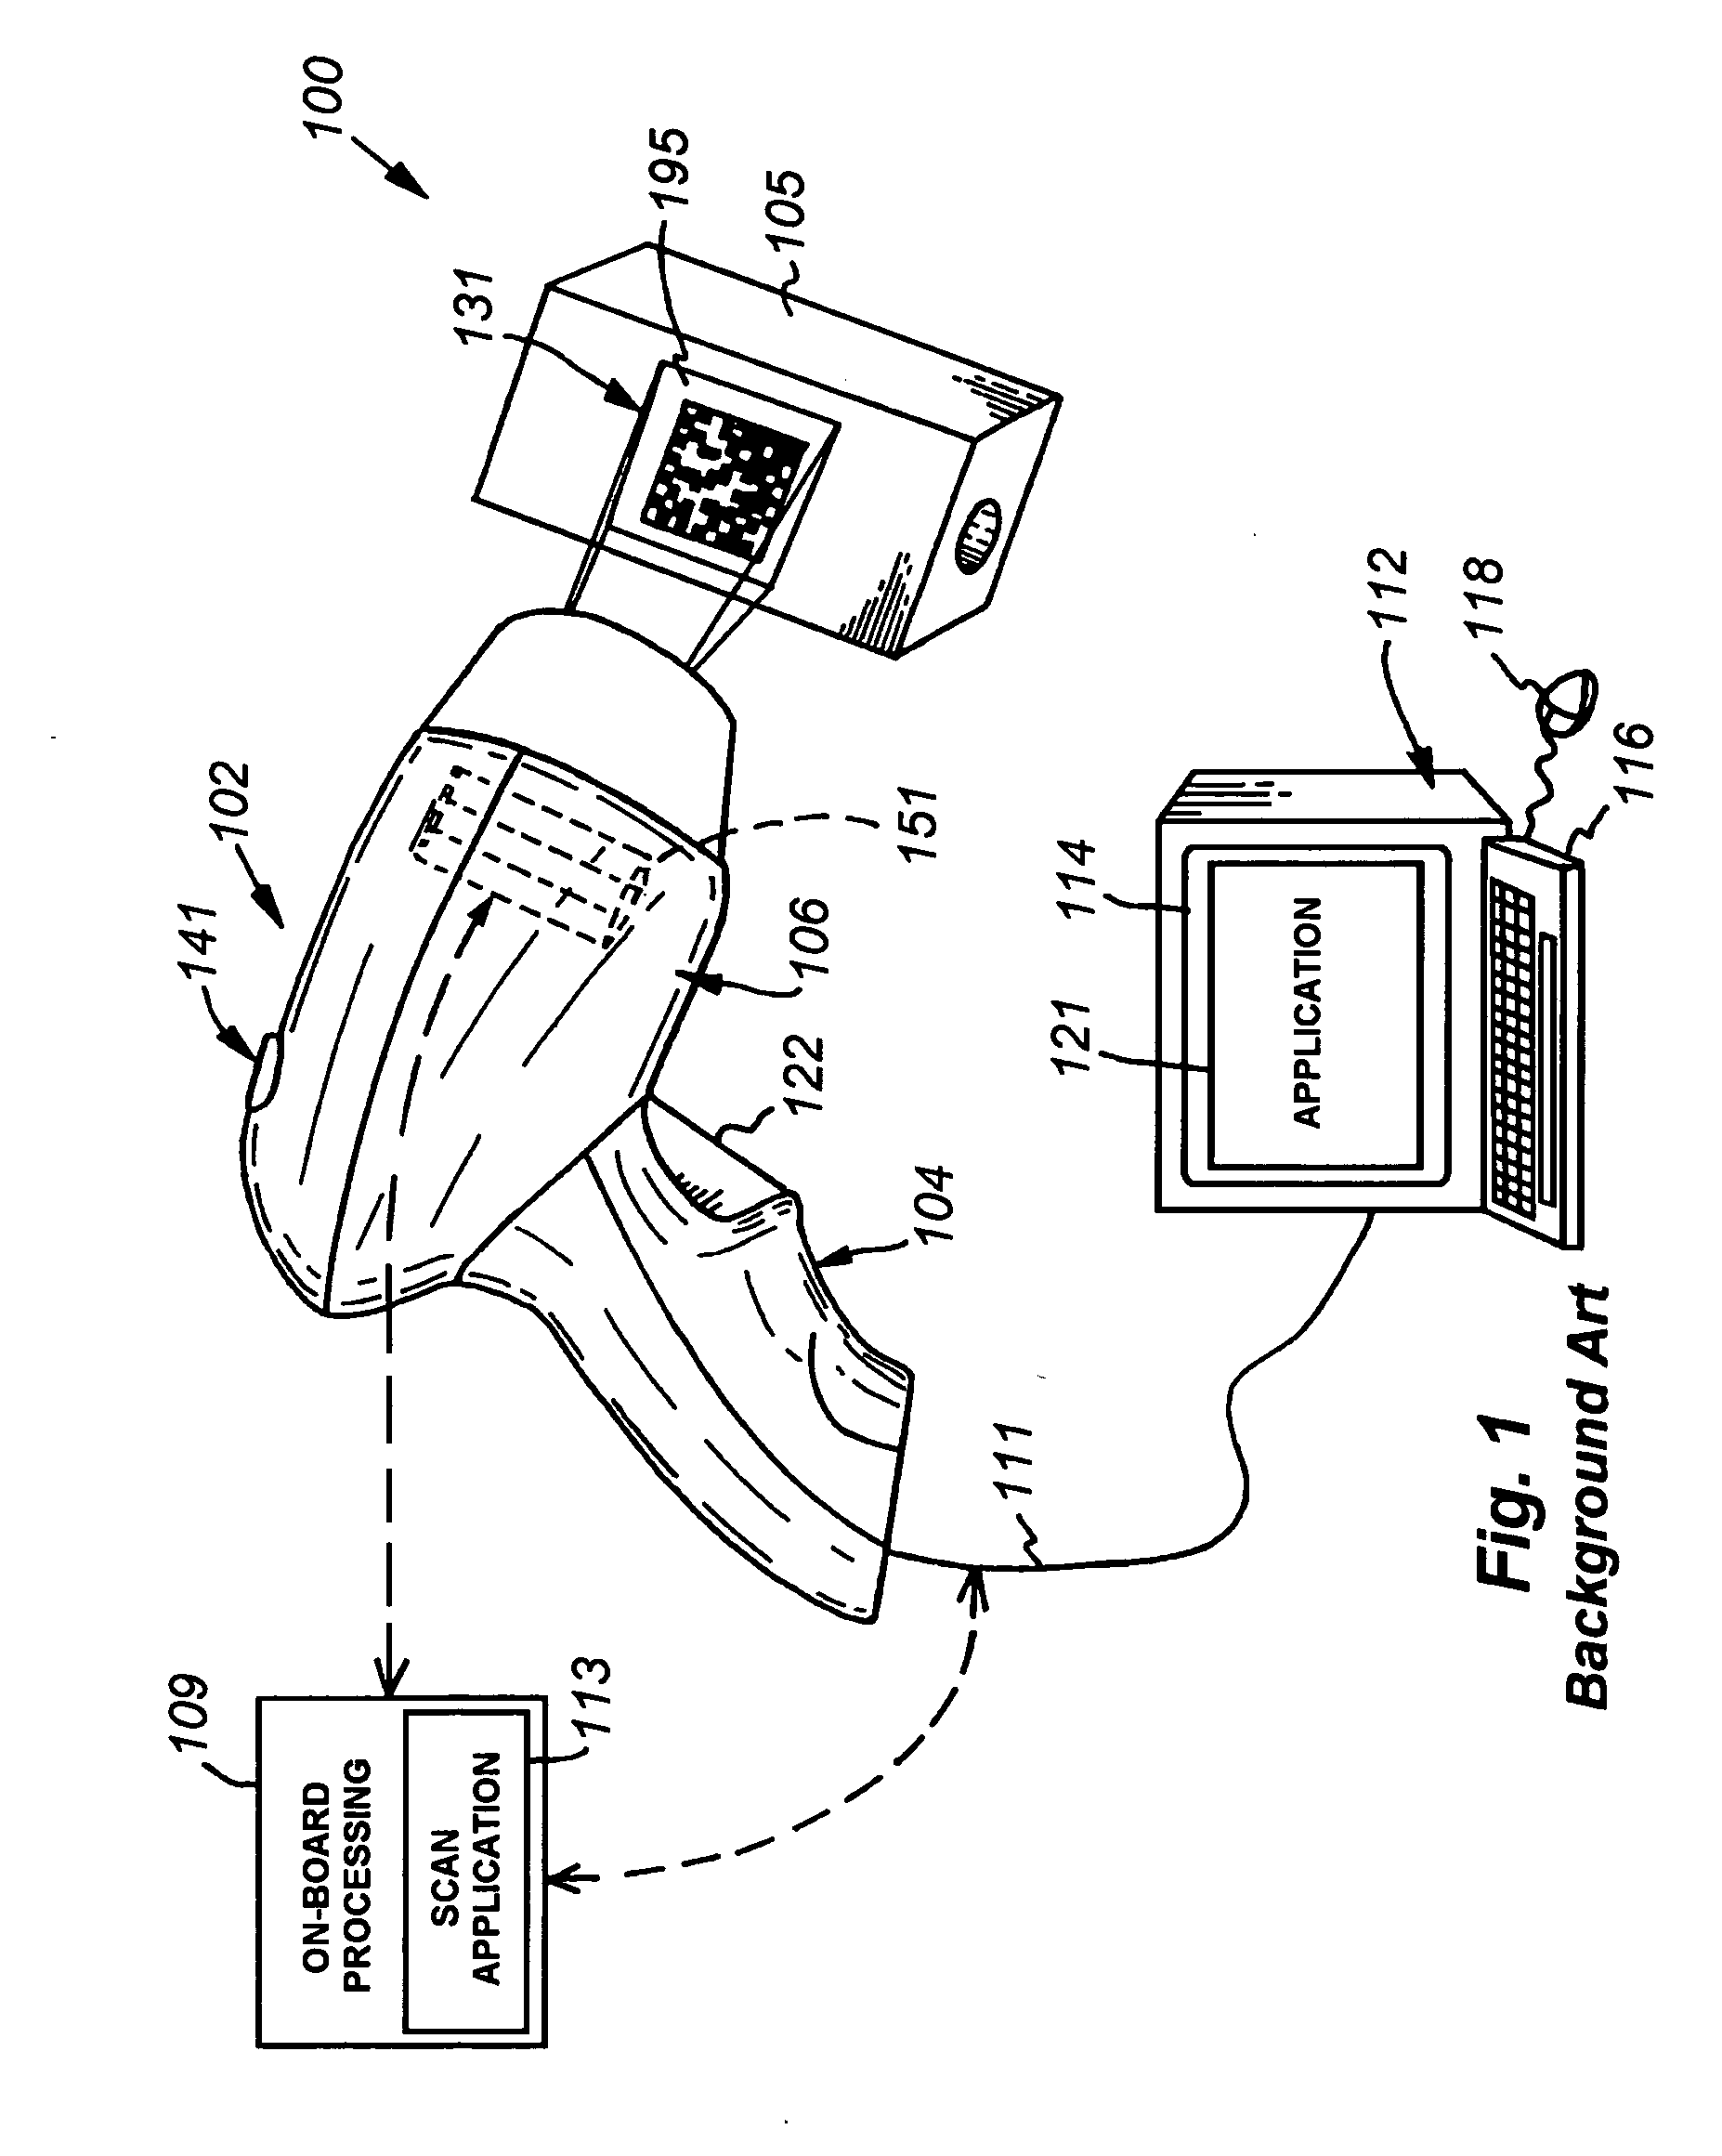 System and method for employing color illumination and color filtration in a symbology reader